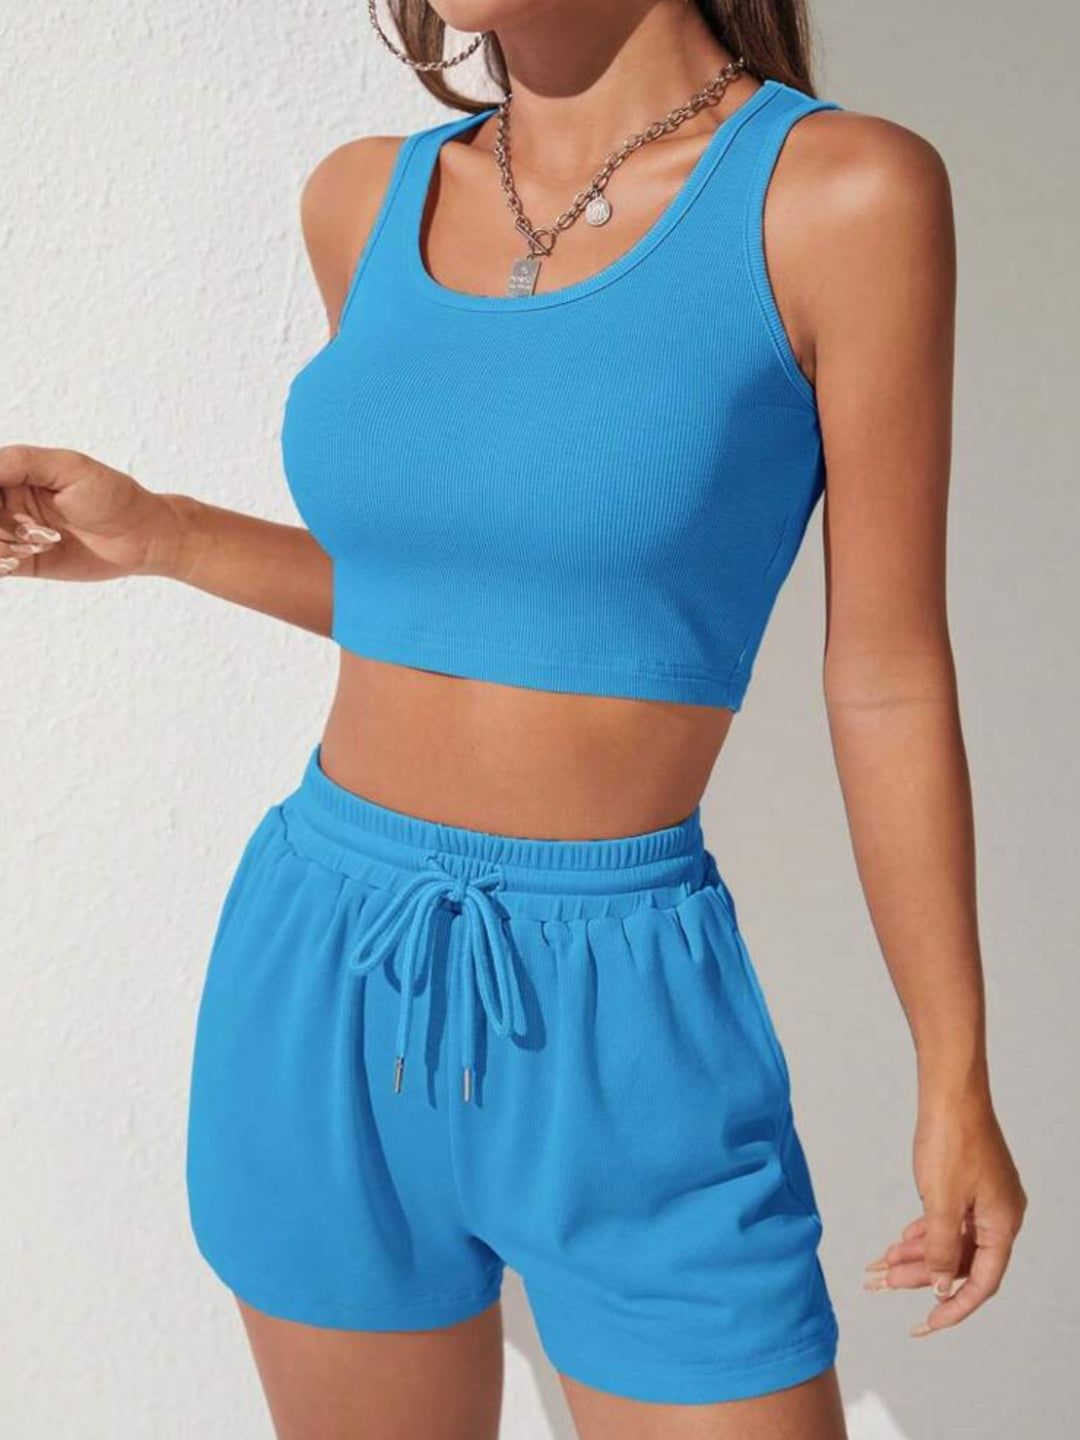 Scoop Neck Wide Strap Top and Drawstring Shorts Set - The Teal Antler Boutique